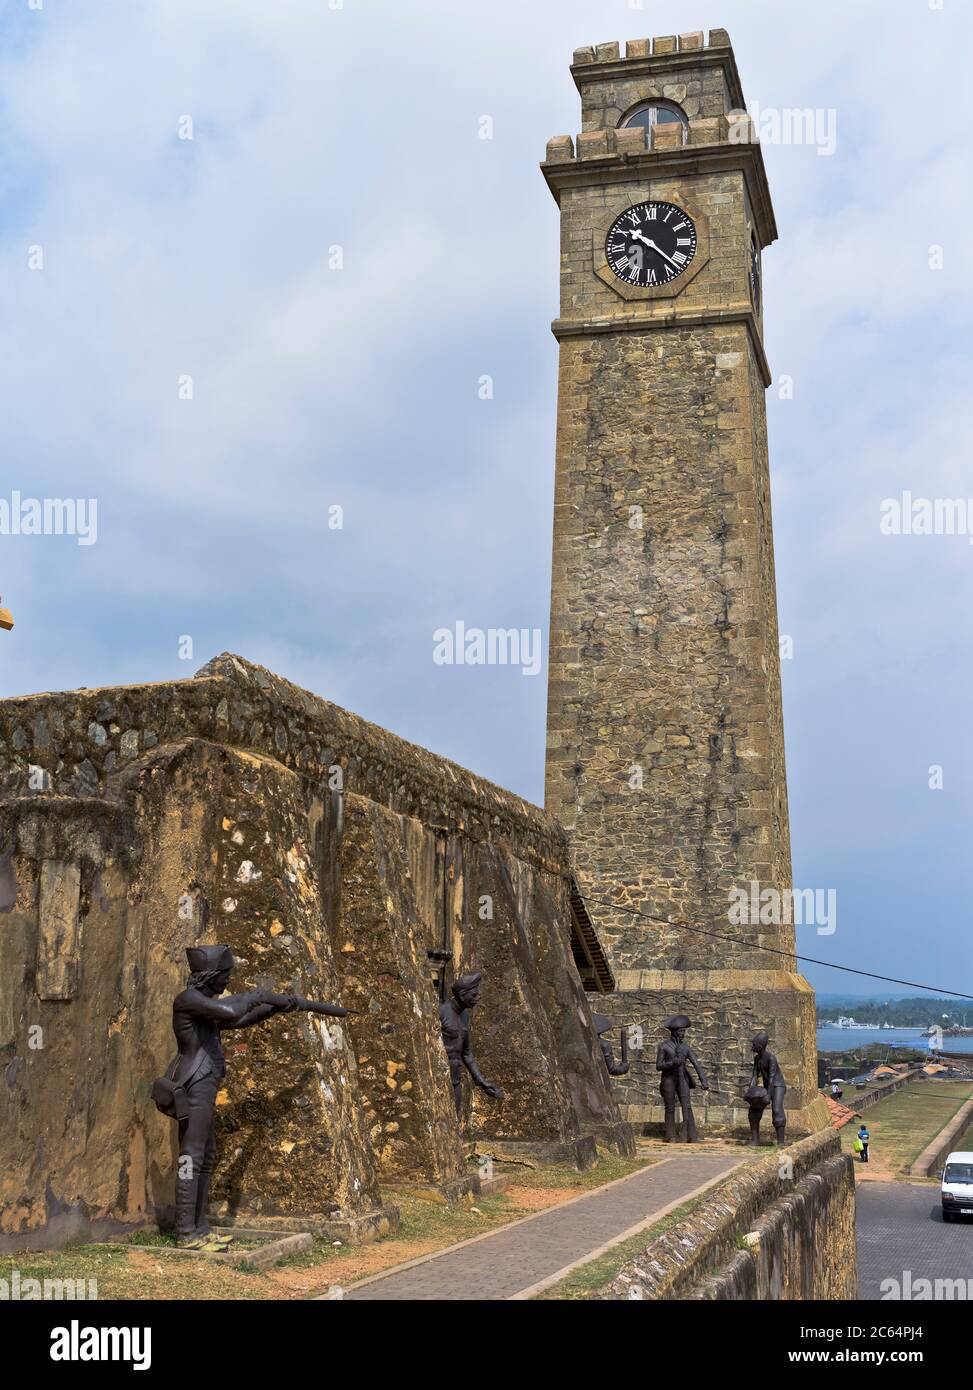 dh Clock Tower GALLE FORT SRI LANKA Colonial forts rampart statue soldiers dutch fortress ramparts Stock Photo